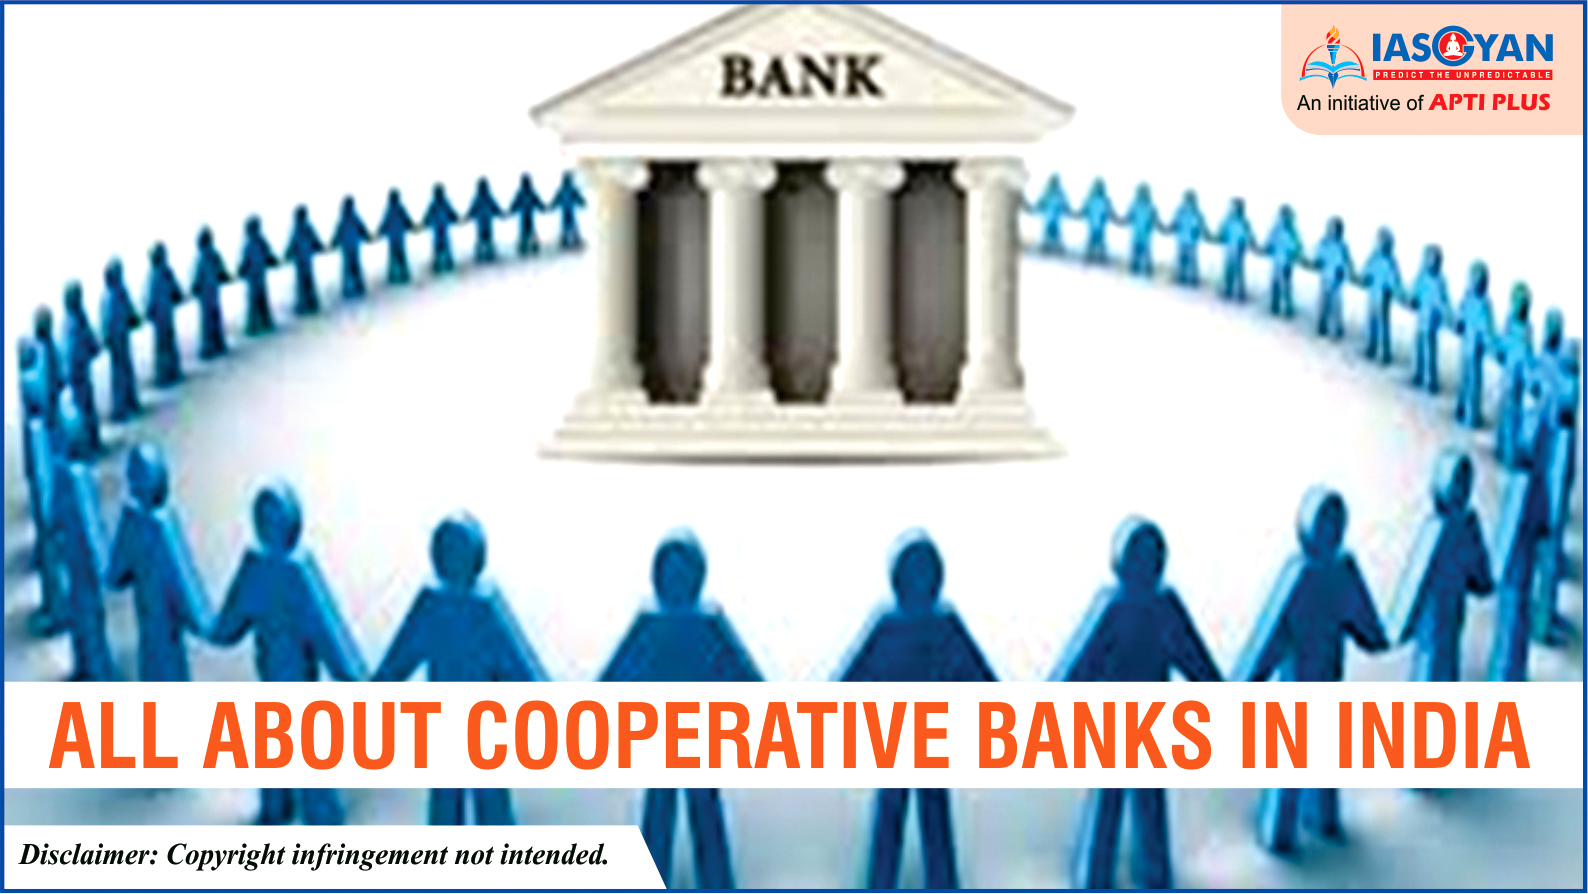 ALL ABOUT COOPERATIVE BANKS IN INDIA